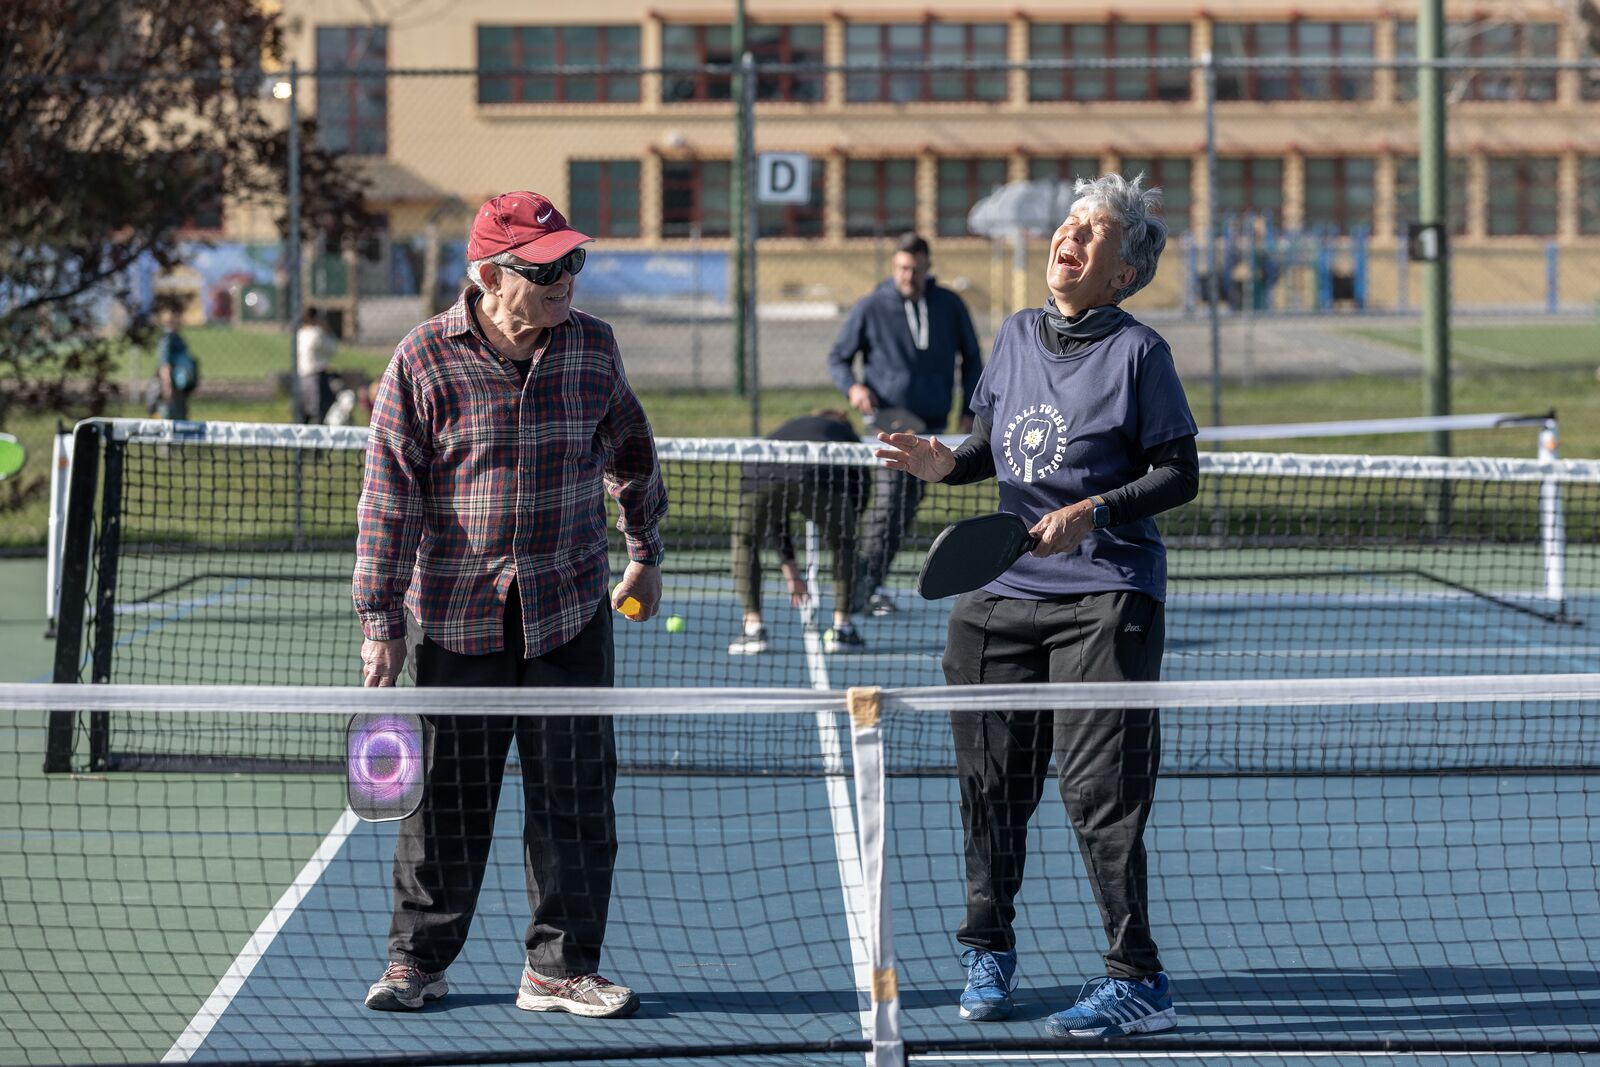 Two people stand smiling and laughing on a pickleball court.